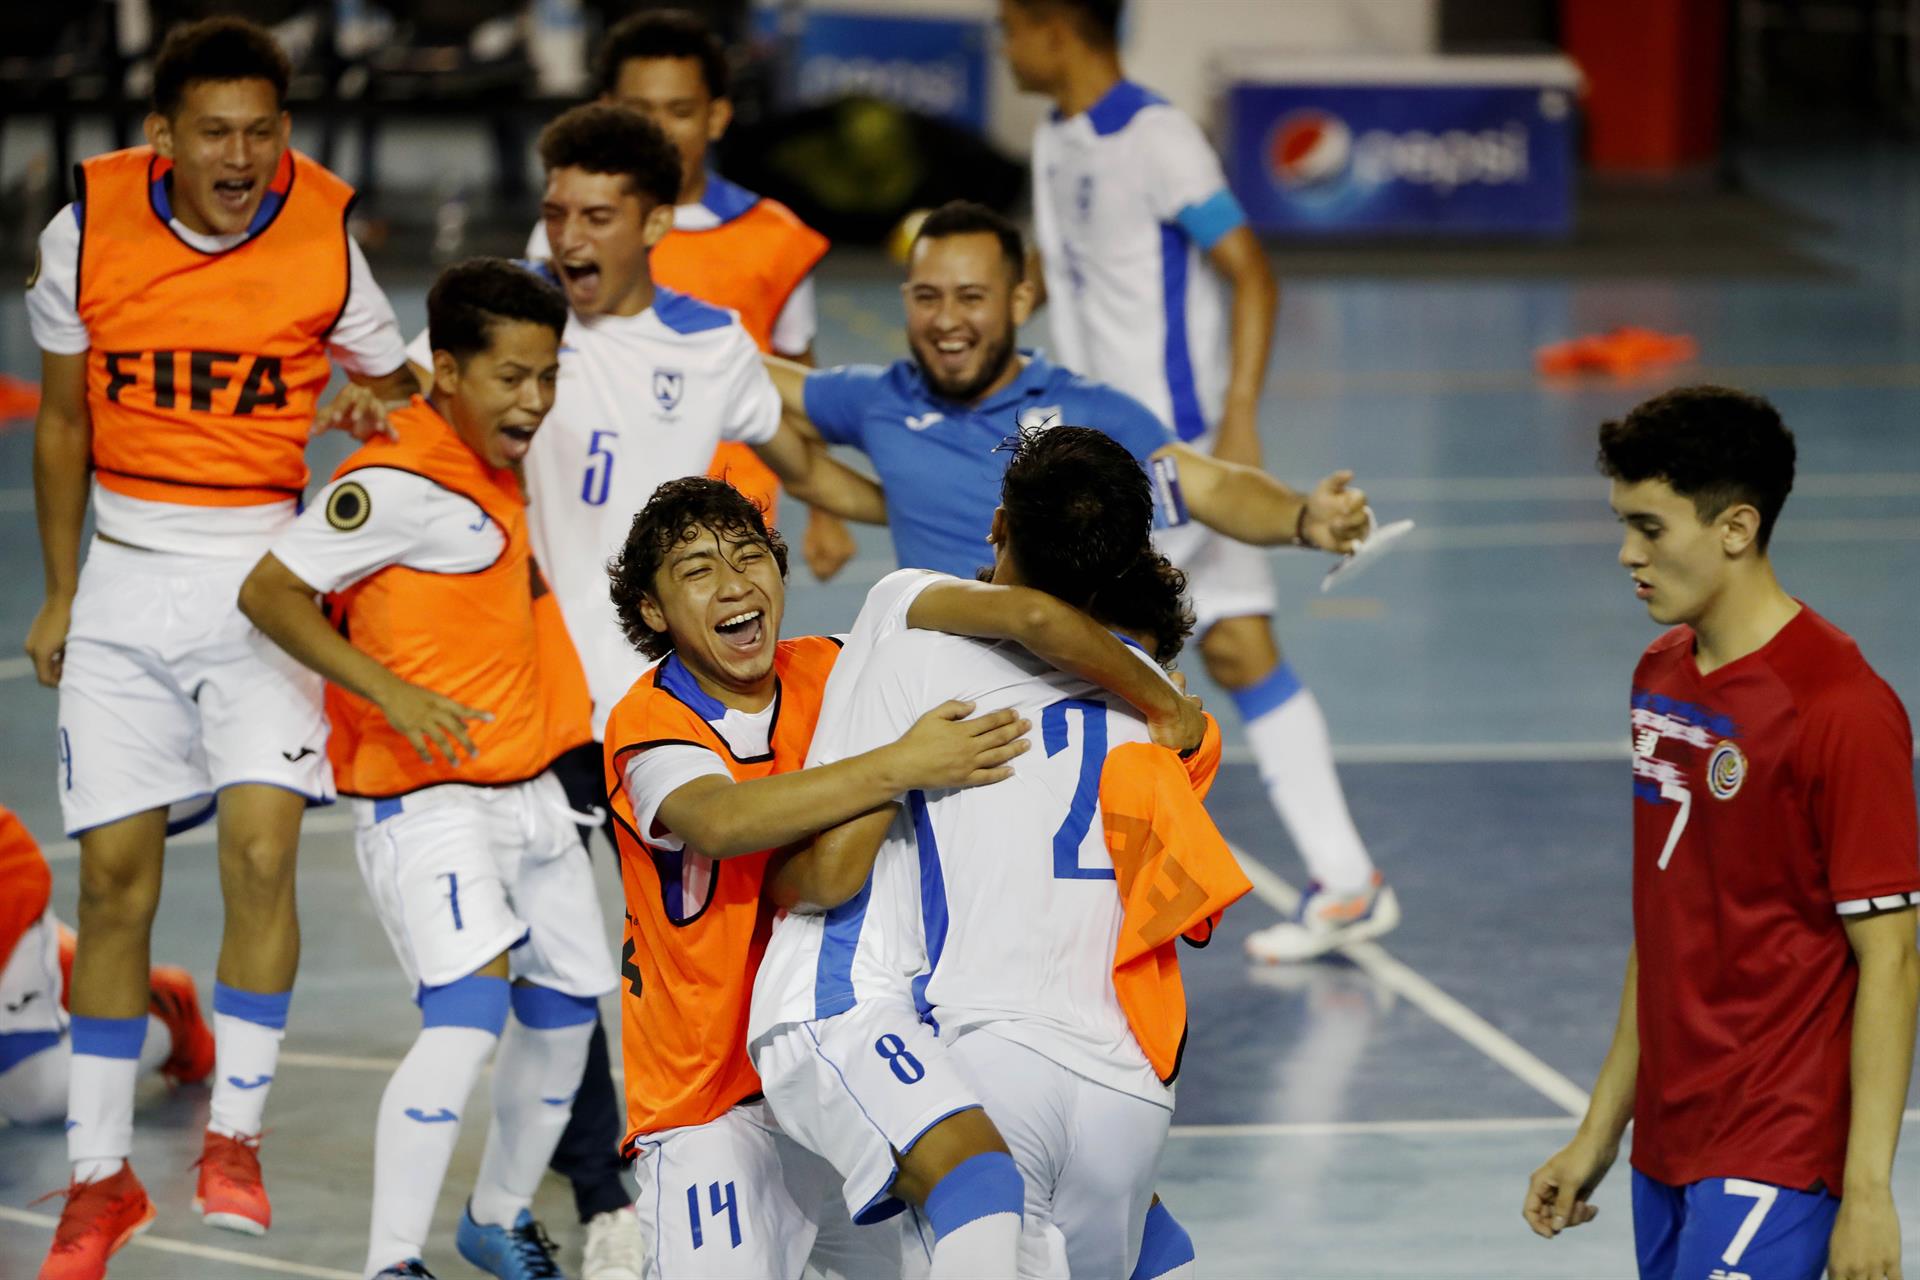 Nicaragua wins the Uncaf sub'20 tournament against all odds